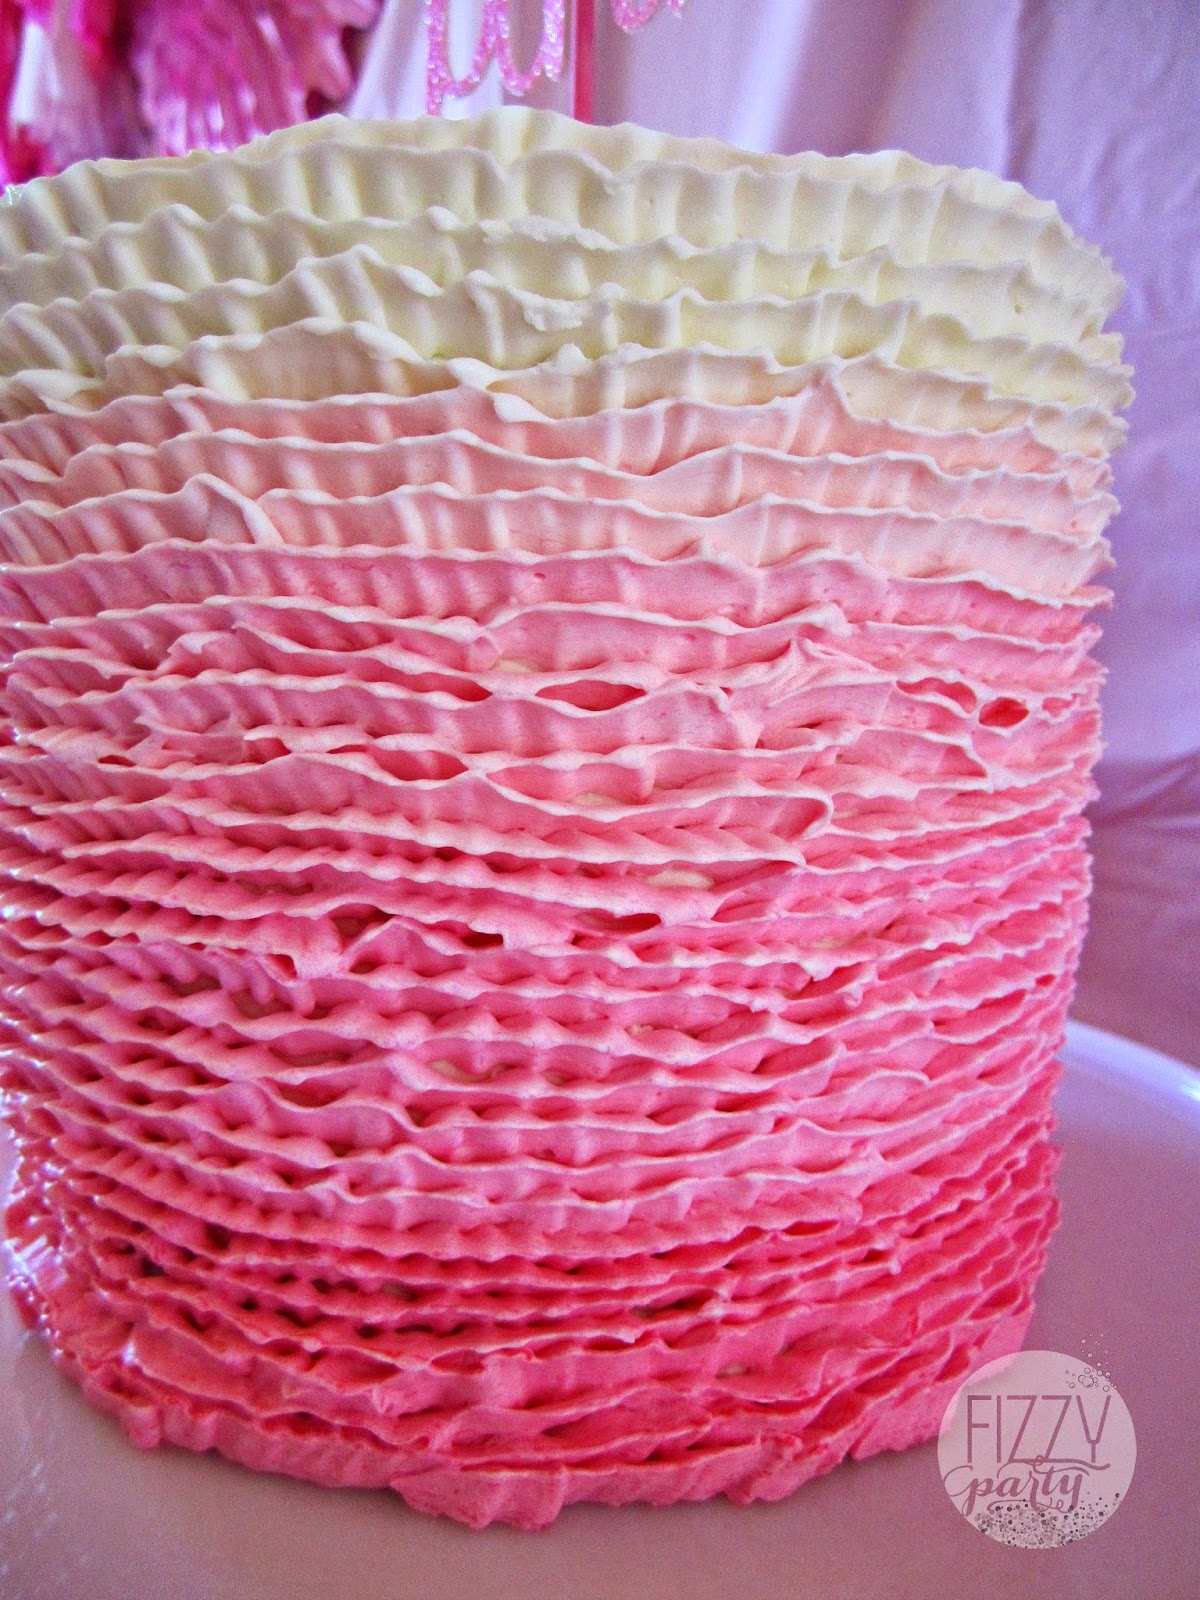 Pink Party ombre cake by Dream Cakes 